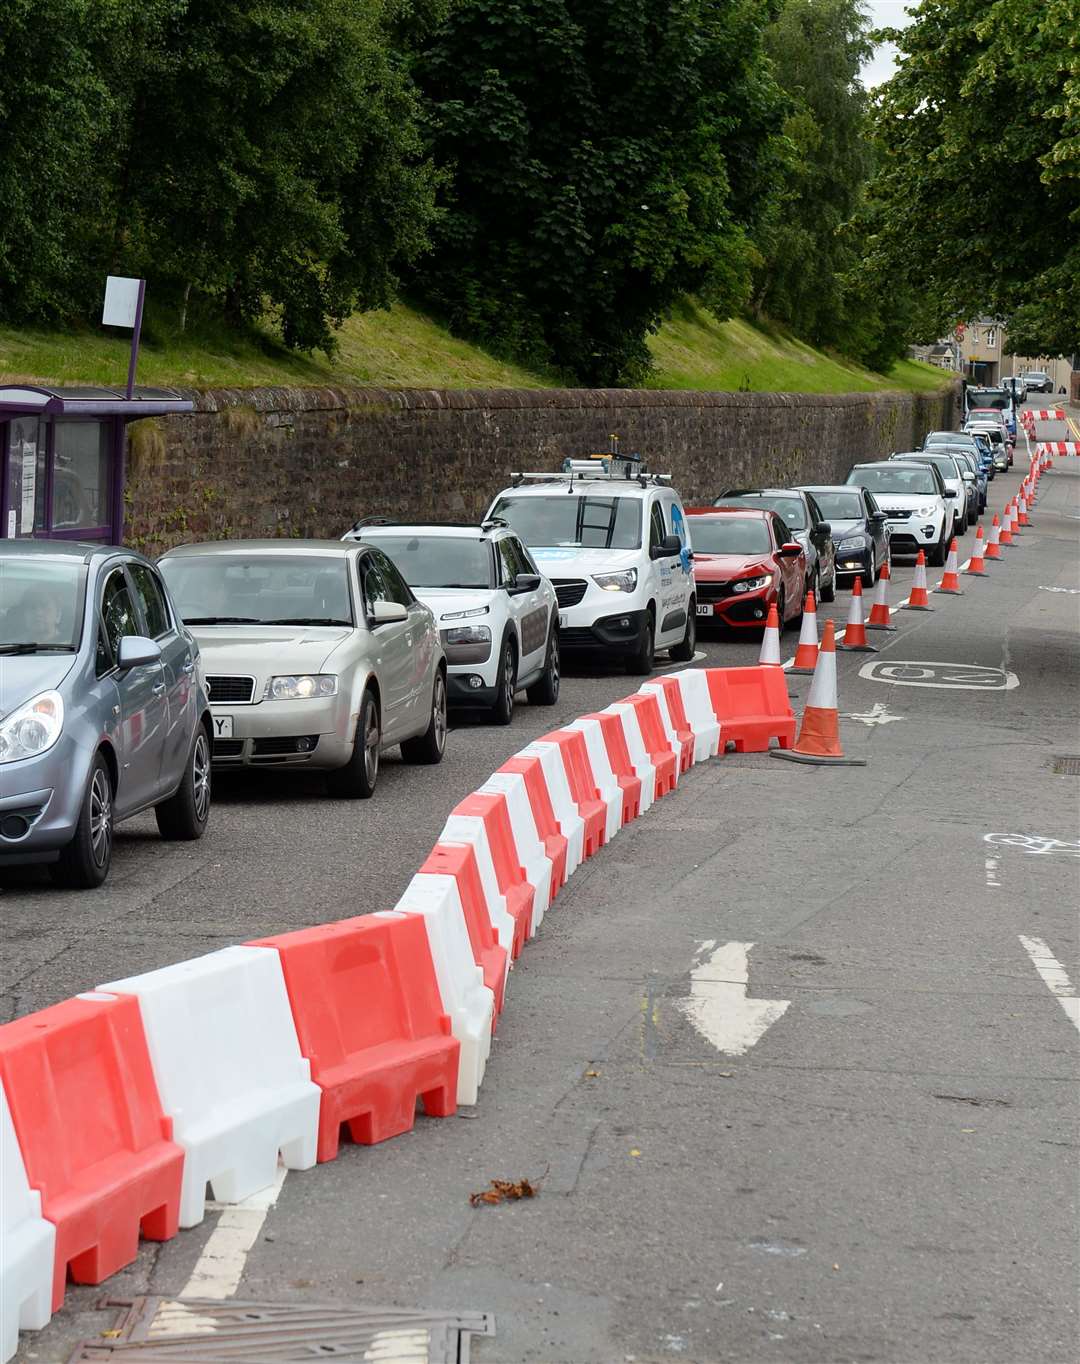 Traffic restrictions around the castle did not go down well with motorists previously.